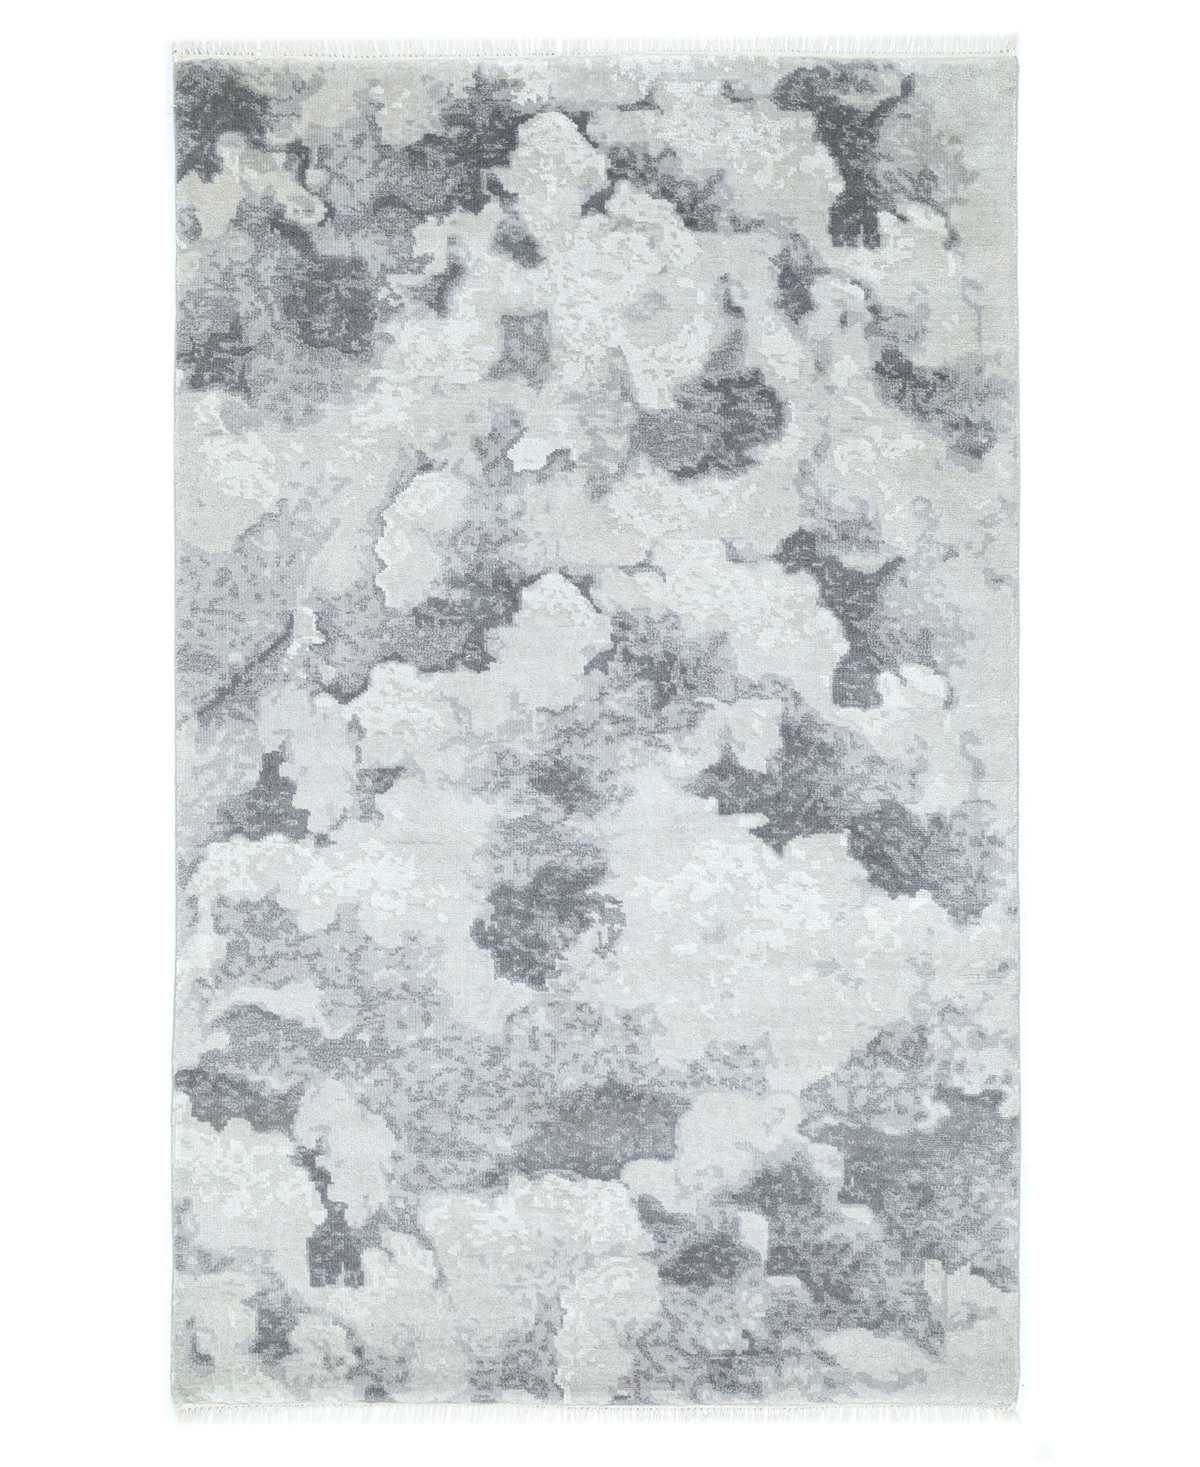 NuStory Newell Turner Clouds 5' x 8' Area Rug - Gray